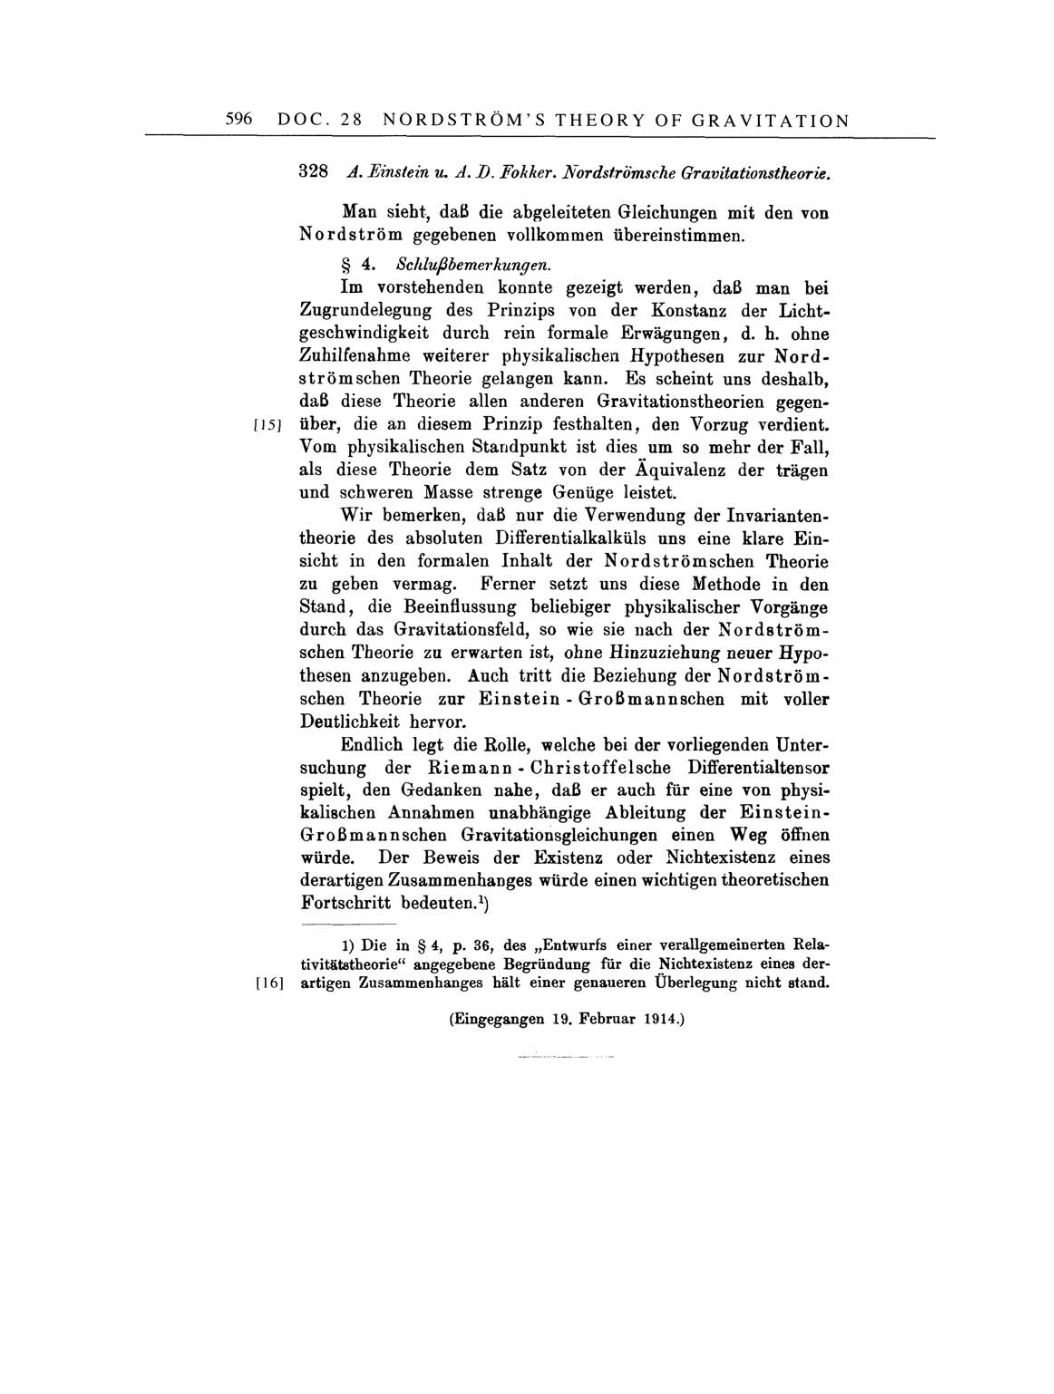 Volume 4: The Swiss Years: Writings 1912-1914 page 596